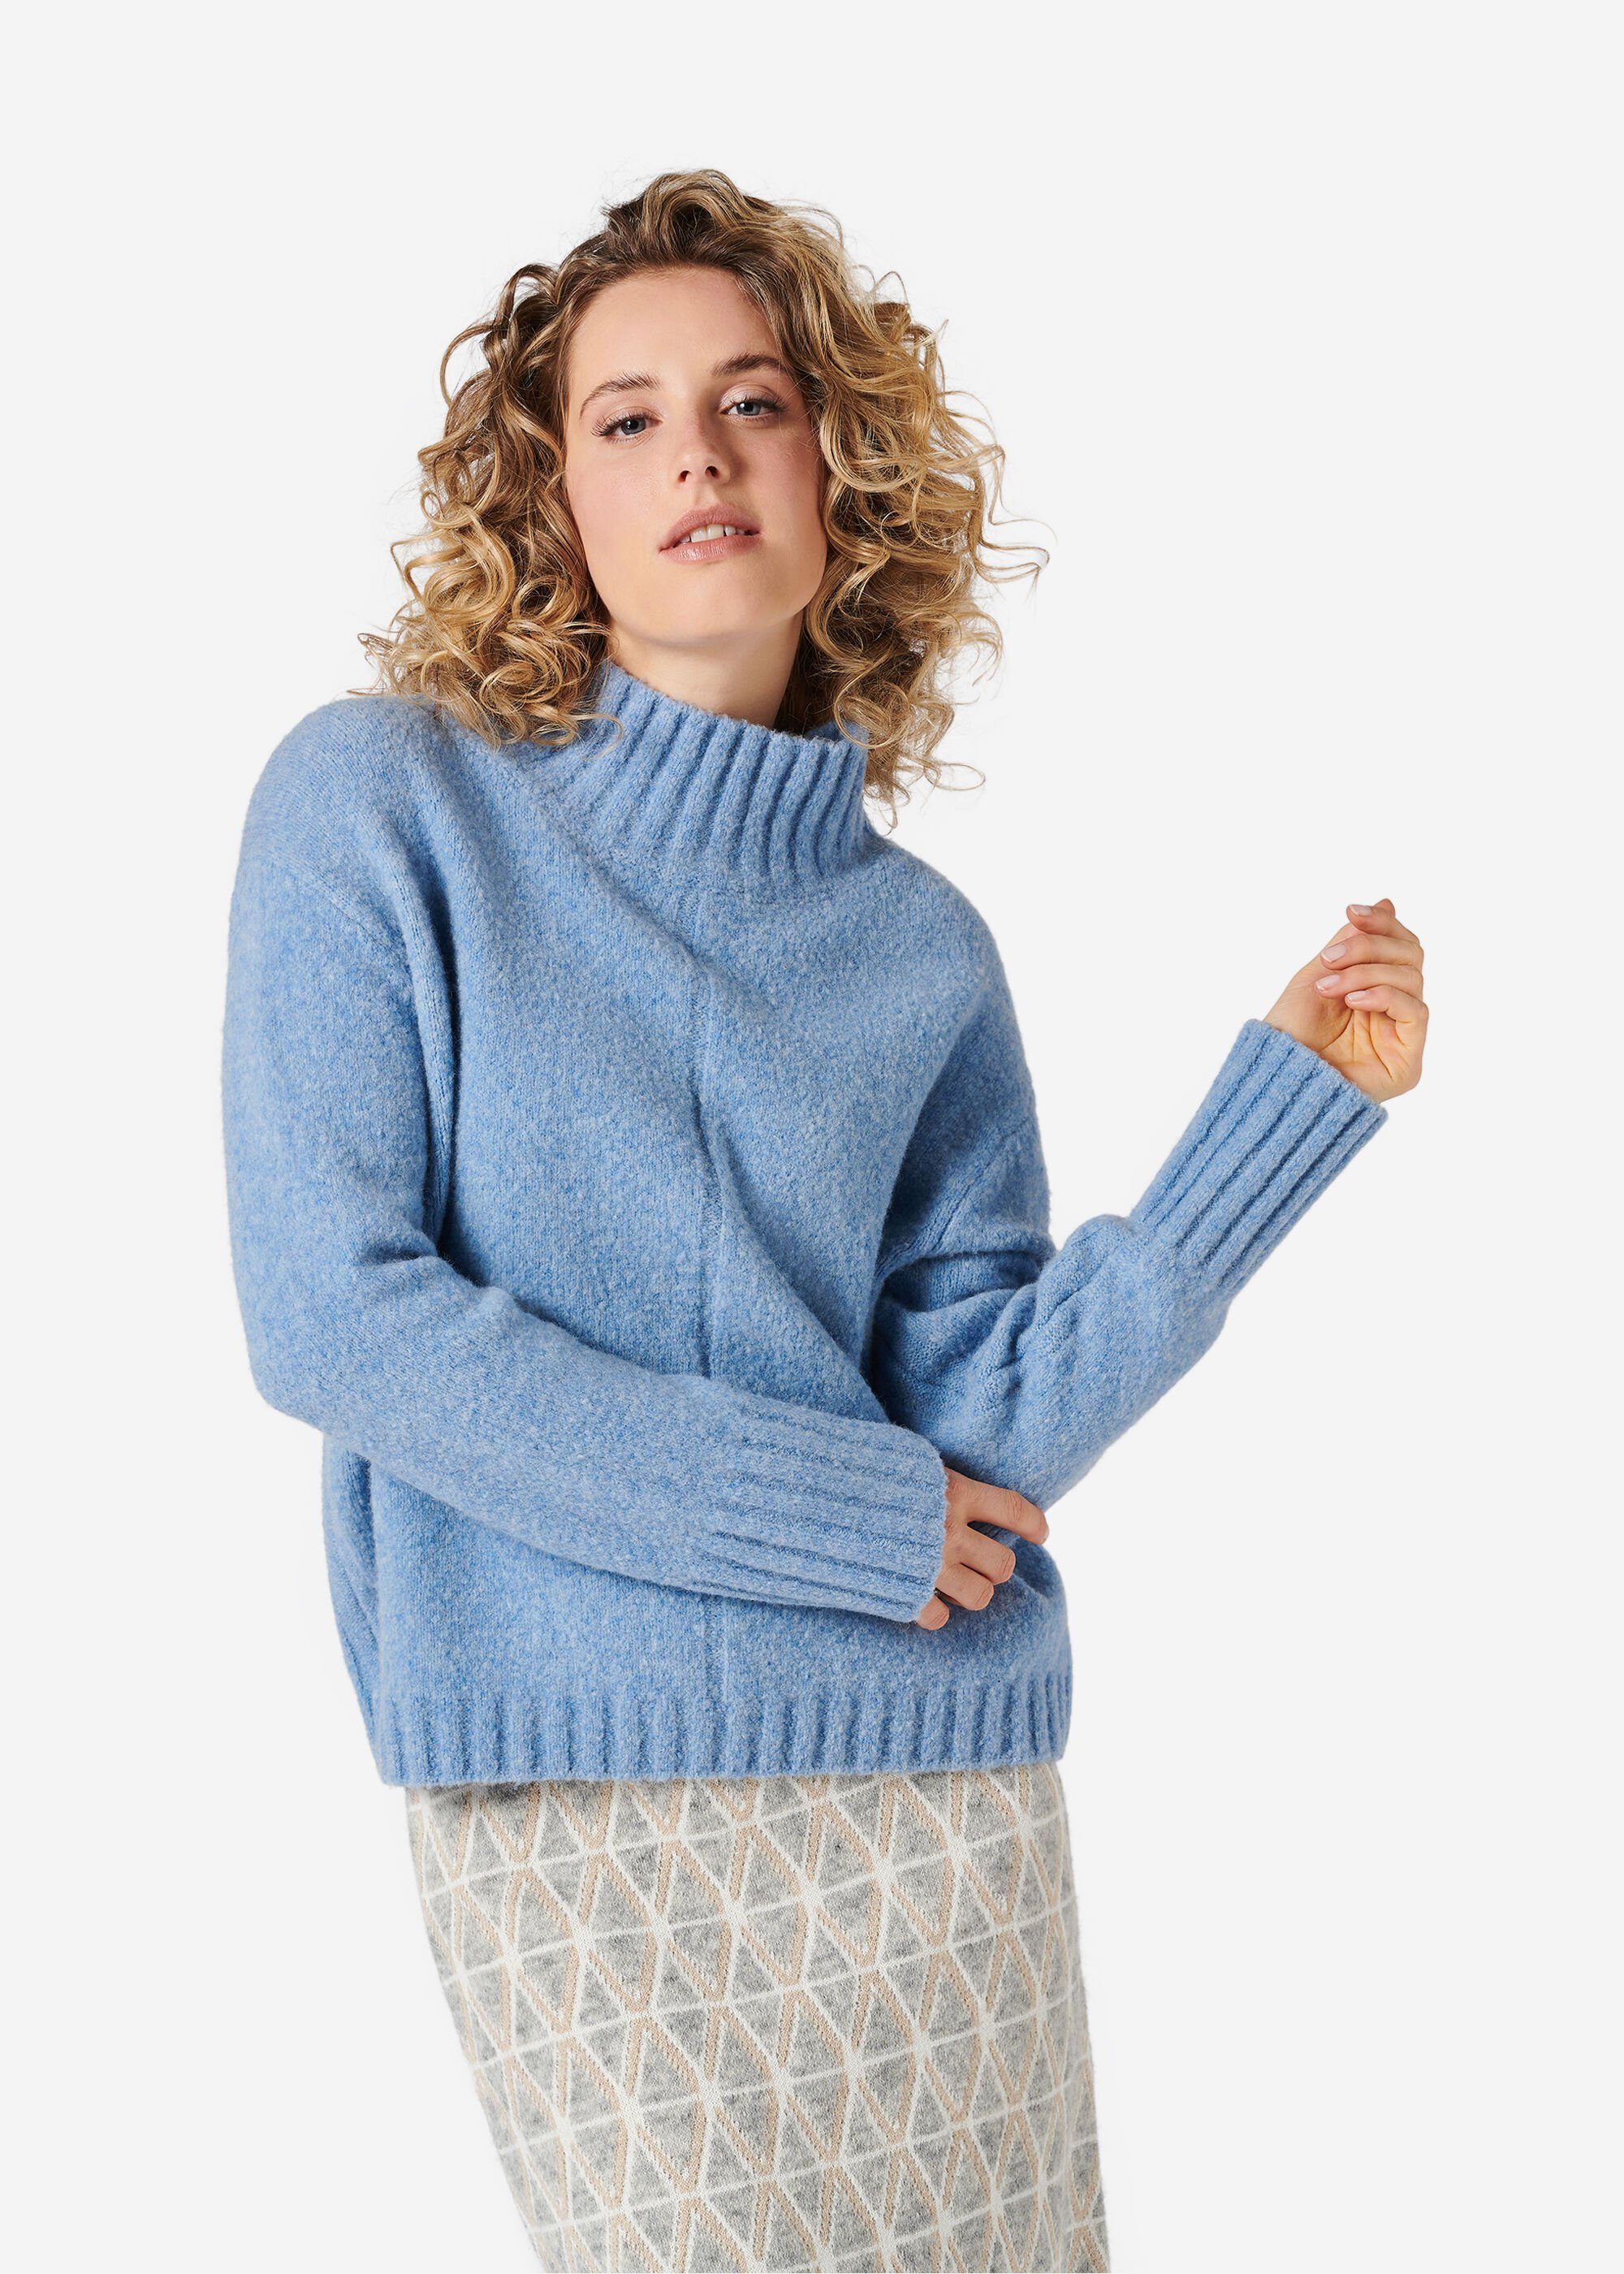 aus Wolle-Yak-Mix in paradise eve mit Strickpullover Polly